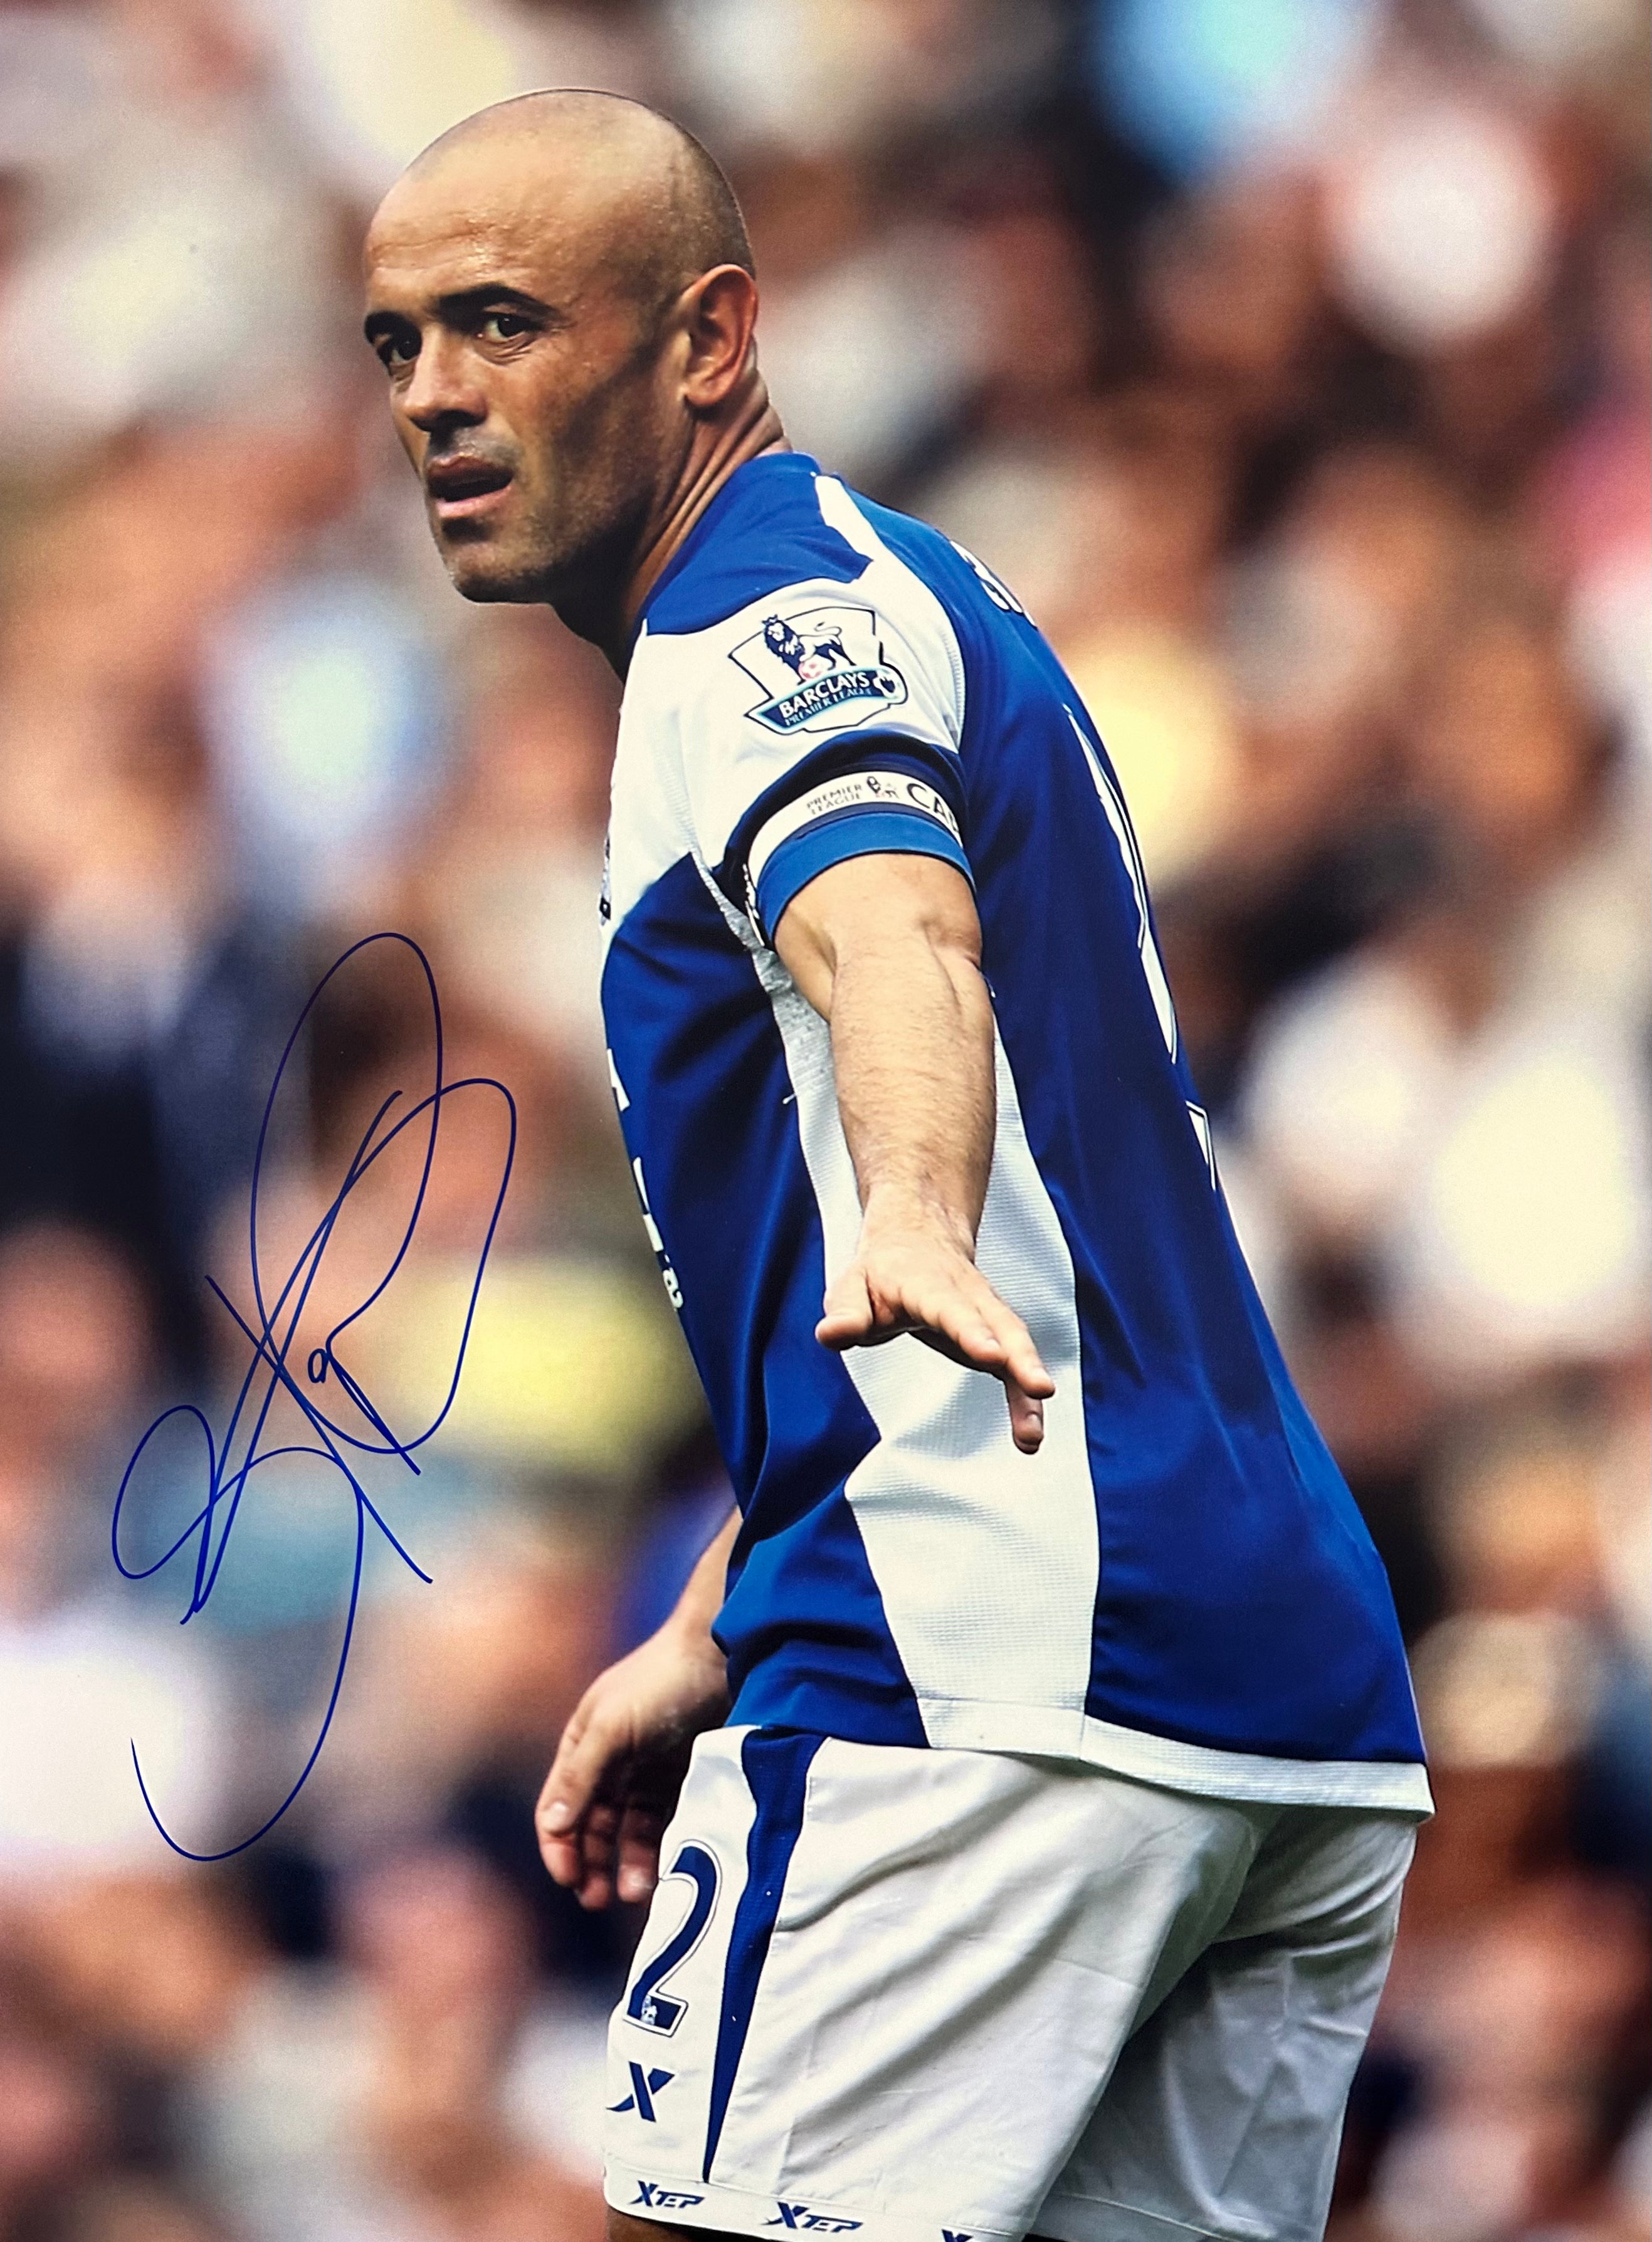 SPECIAL OFFER “Signed Stephen Carr 16 x 12“ colour photo